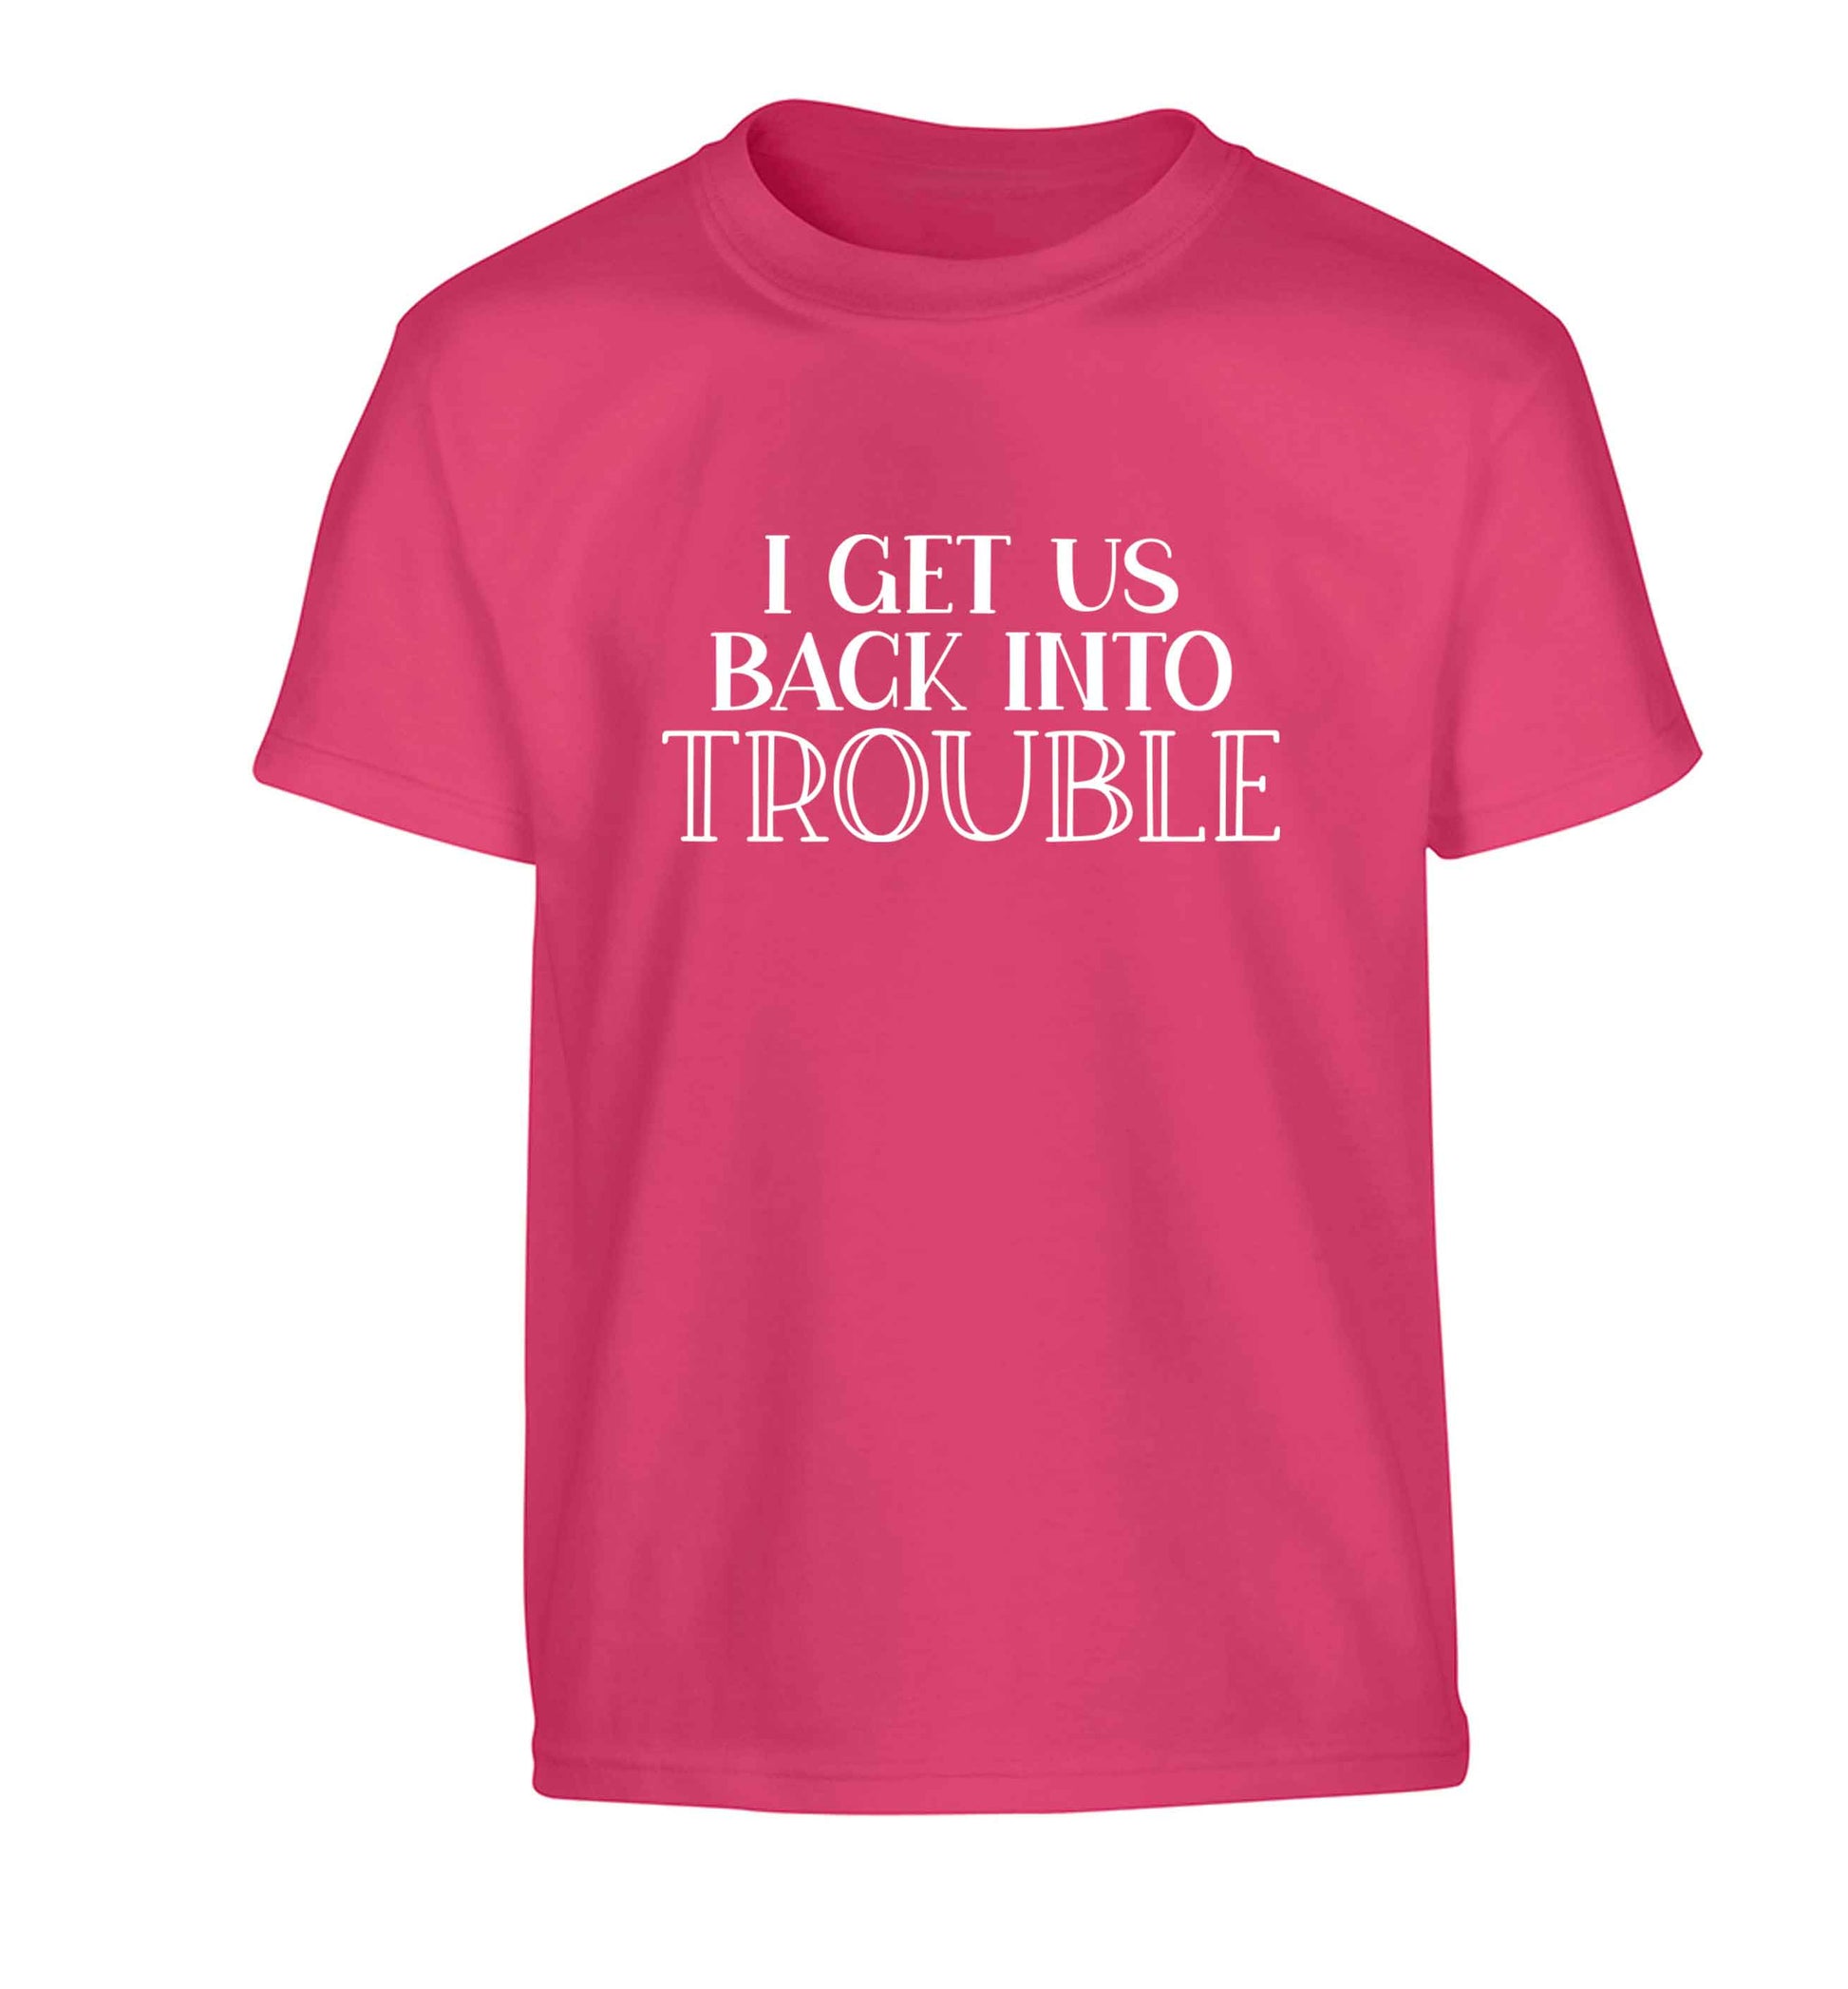 I get us back into trouble Children's pink Tshirt 12-13 Years